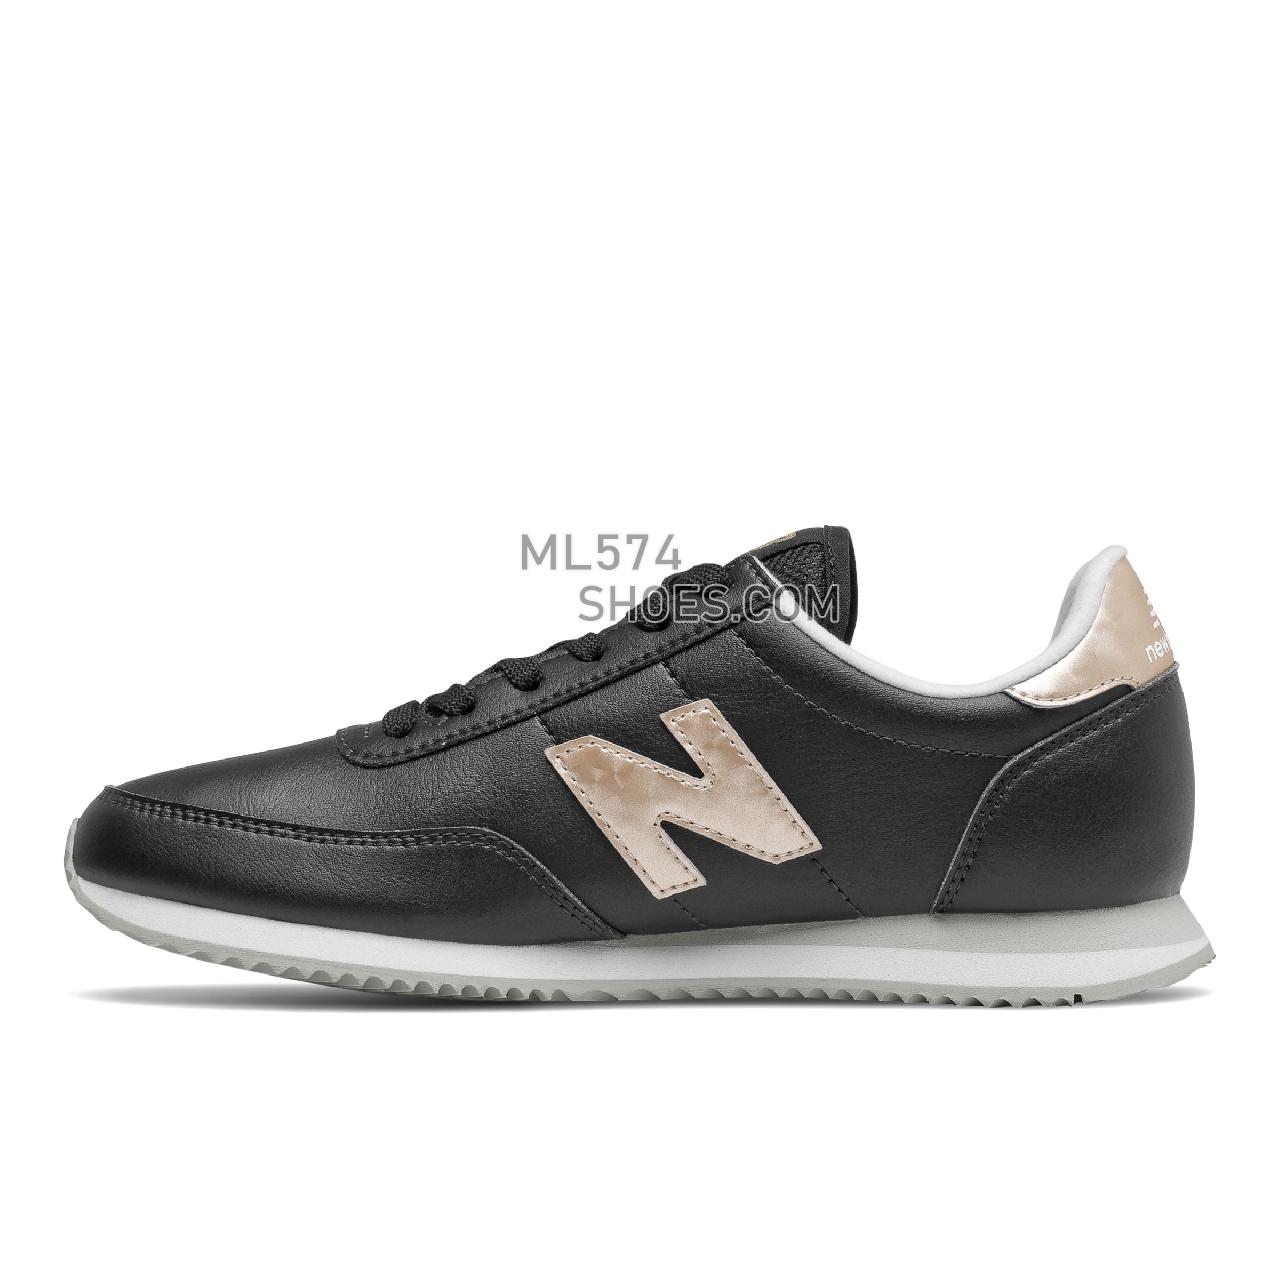 New Balance 720 - Women's Classic Sneakers - Black with Gold - WL720MC1